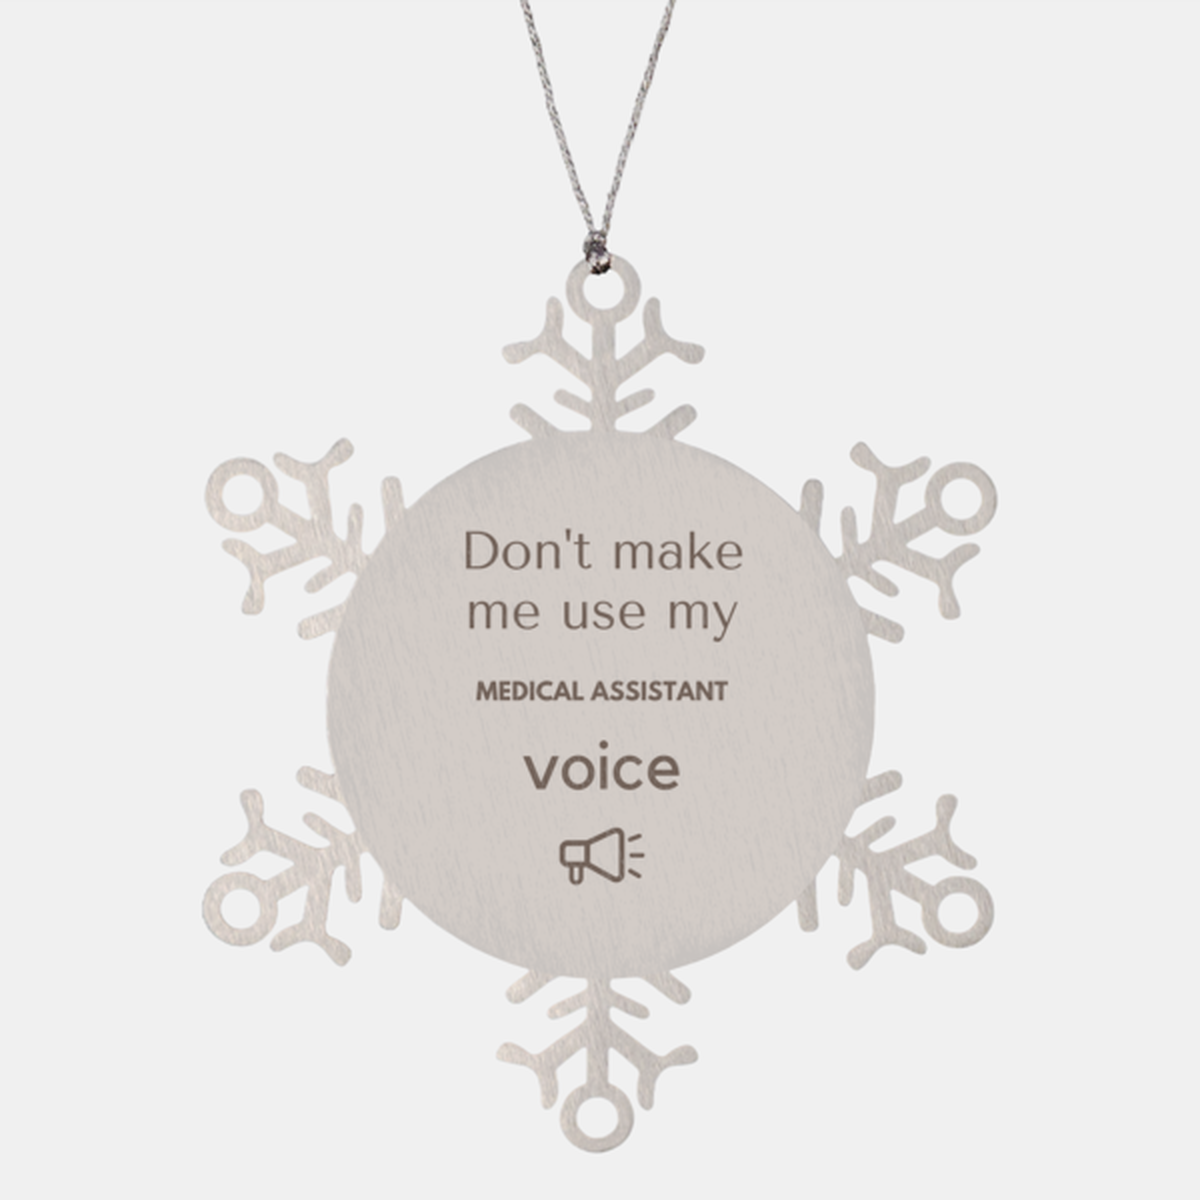 Don't make me use my Medical Assistant voice, Sarcasm Medical Assistant Ornament Gifts, Christmas Medical Assistant Snowflake Ornament Unique Gifts For Medical Assistant Coworkers, Men, Women, Colleague, Friends